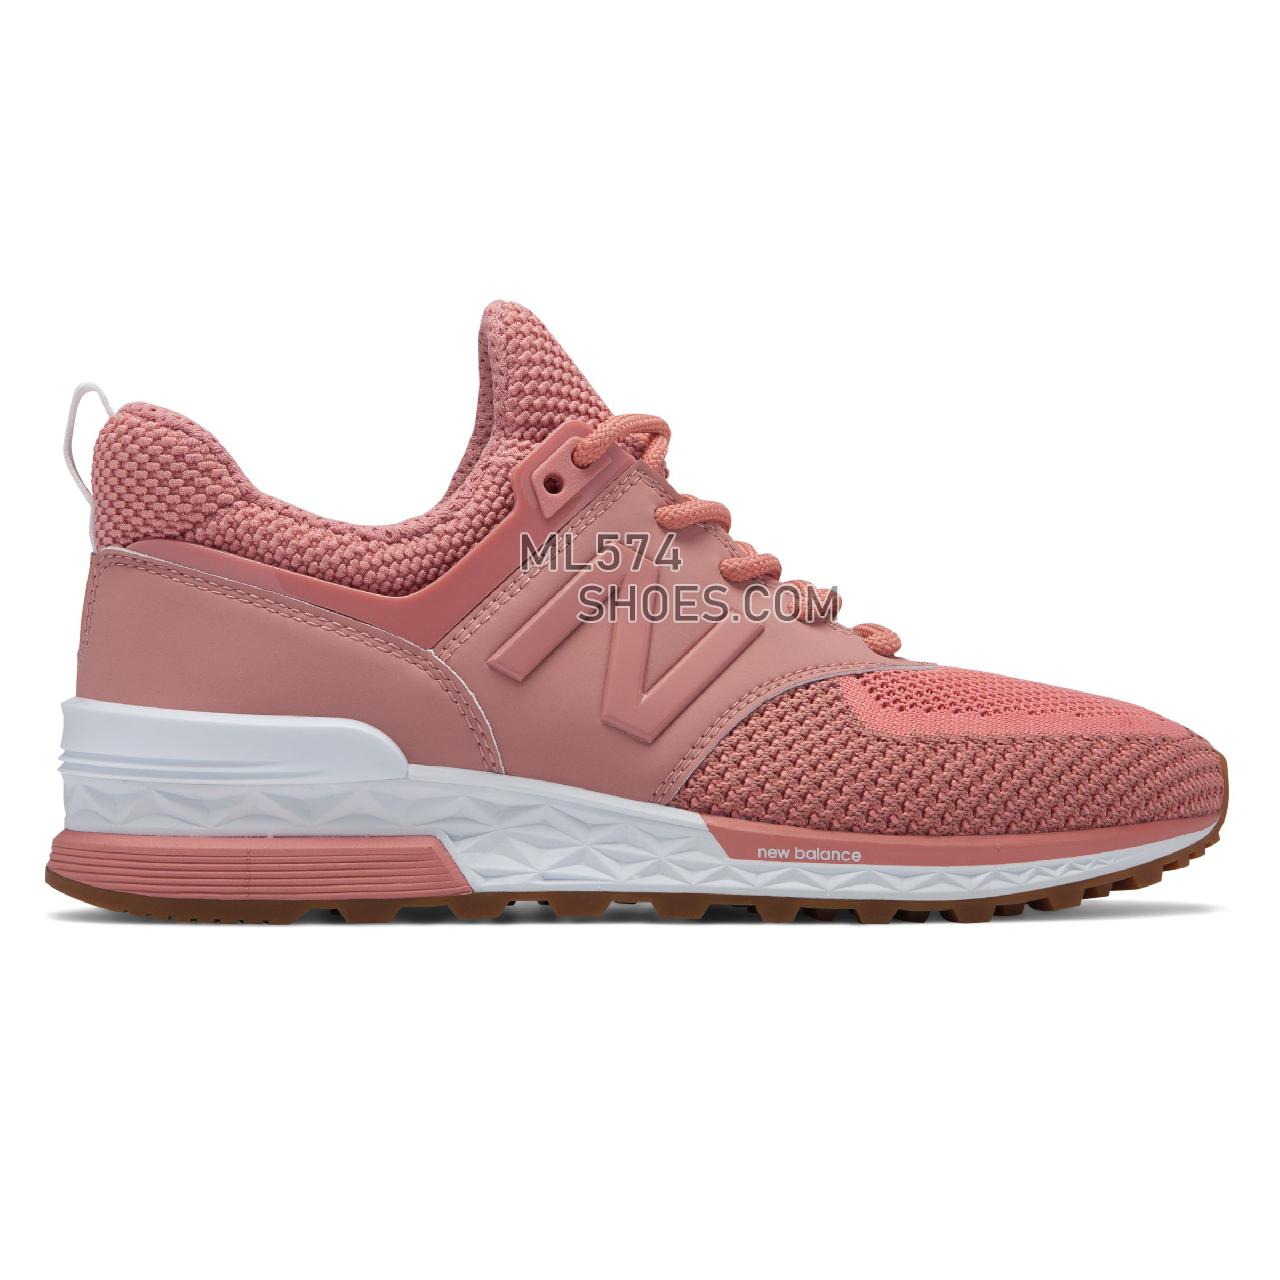 New Balance 574 Sport - Women's 574 - Classic Dusted Peach - WS574WC